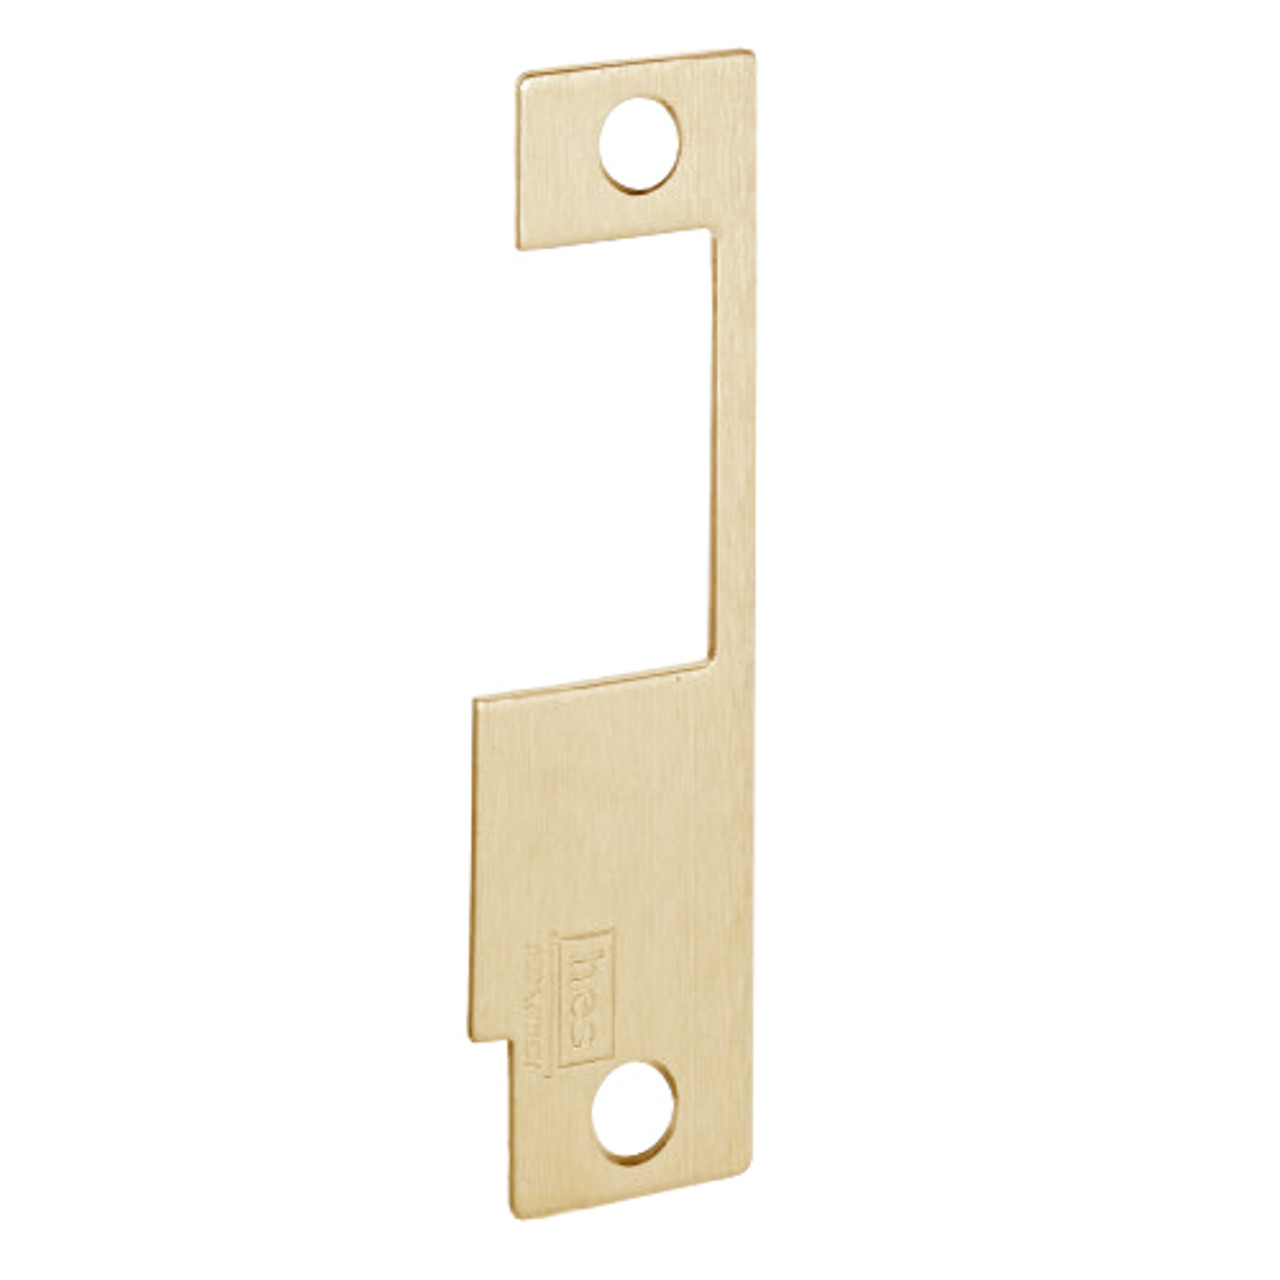 852K-606 Hes 4-7/8" x 1-1/4" Faceplate in Satin Brass Finish